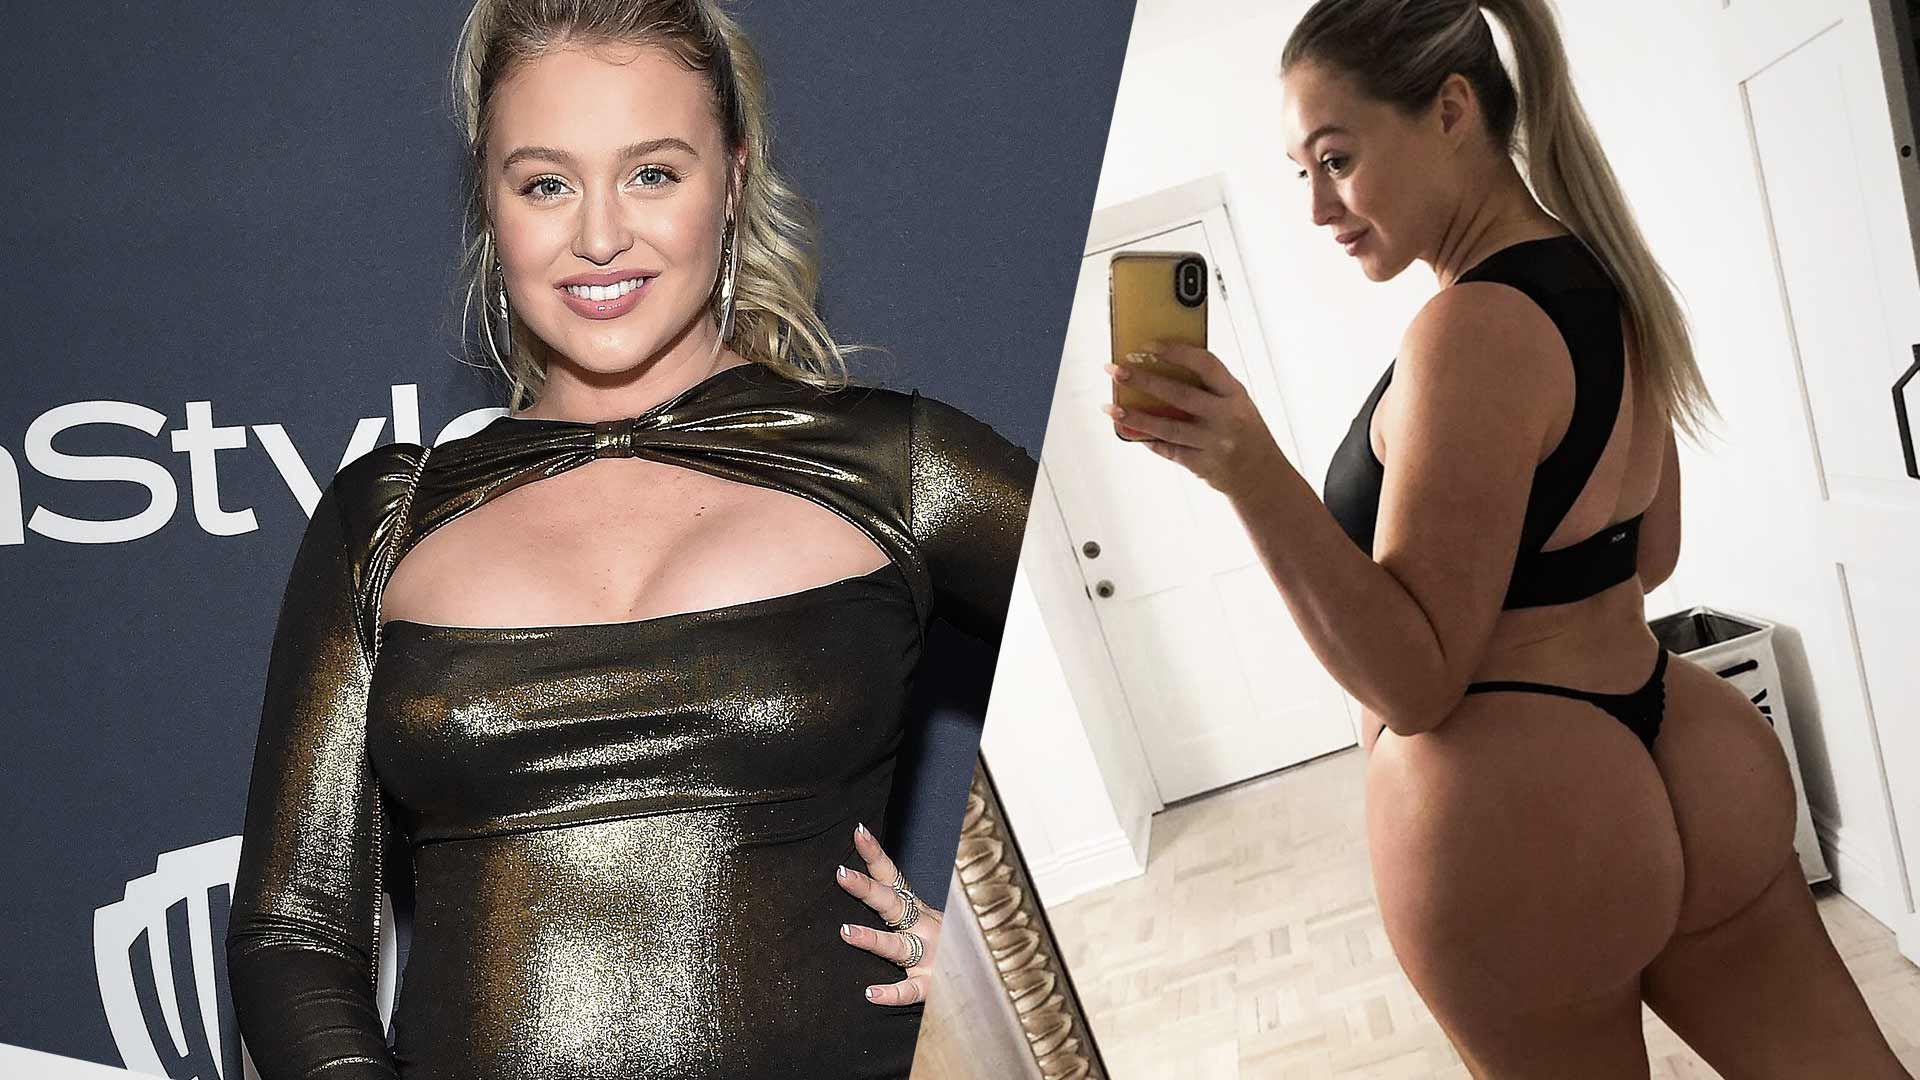 7 Months Pregnant Nude - Model Iskra Lawrence Flaunts Insane Booty In Teeny Thong At 7 Months  Pregnant